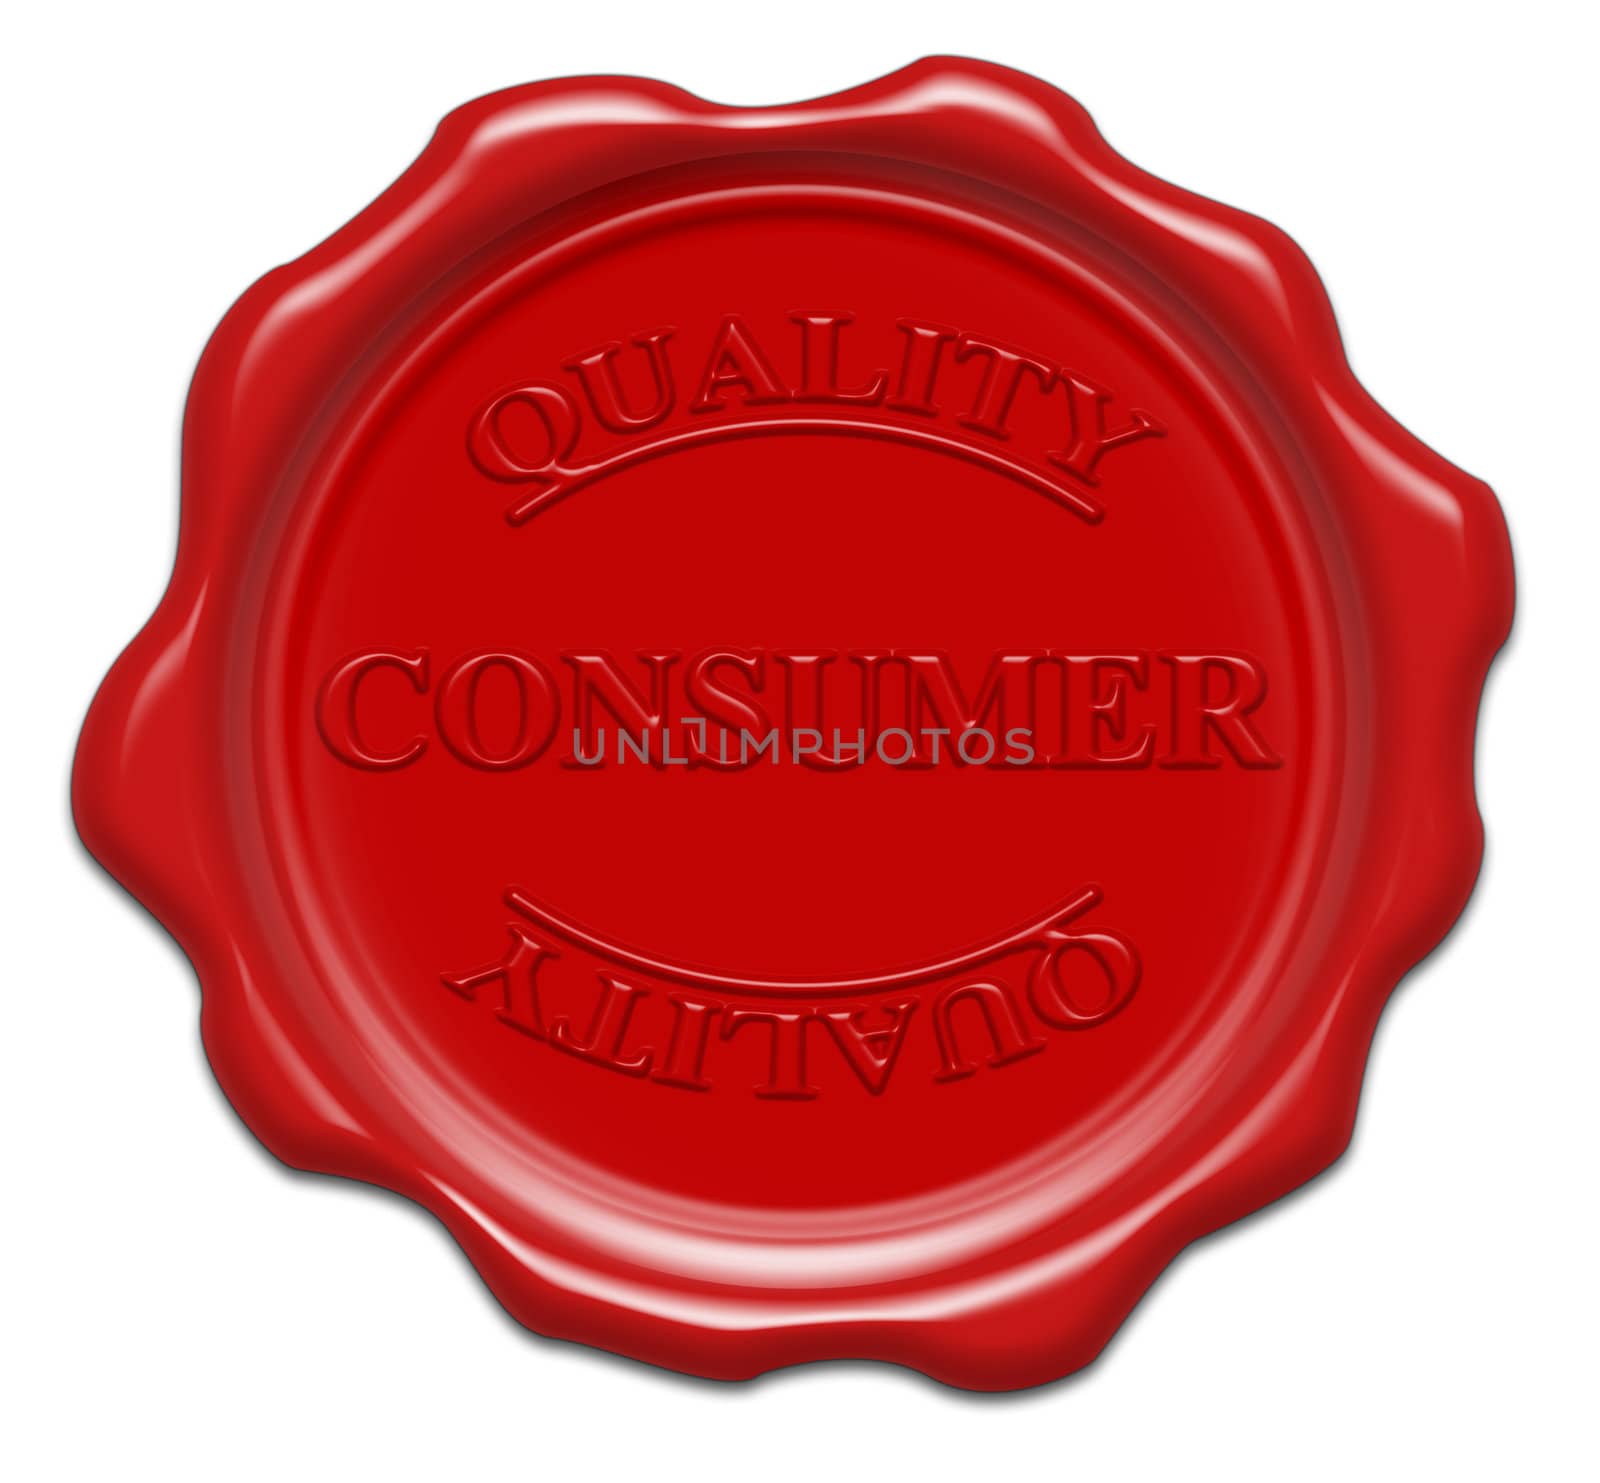 quality consumer - illustration red wax seal isolated on white b by mozzyb